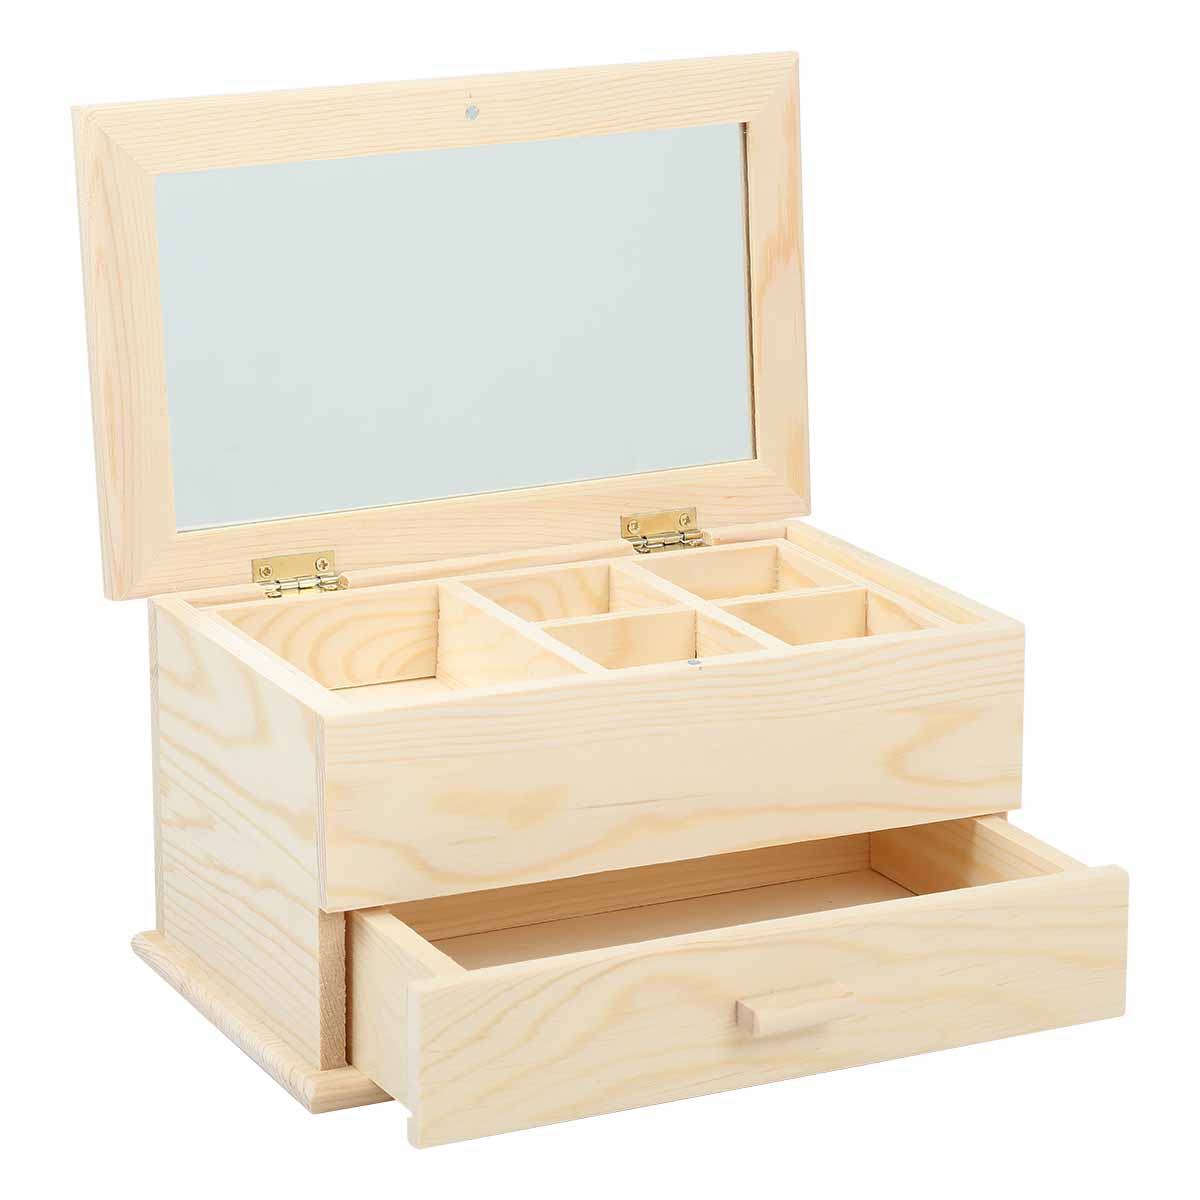 Image of Urban Crafter Deluxe Jewellery Box with Removable Tray